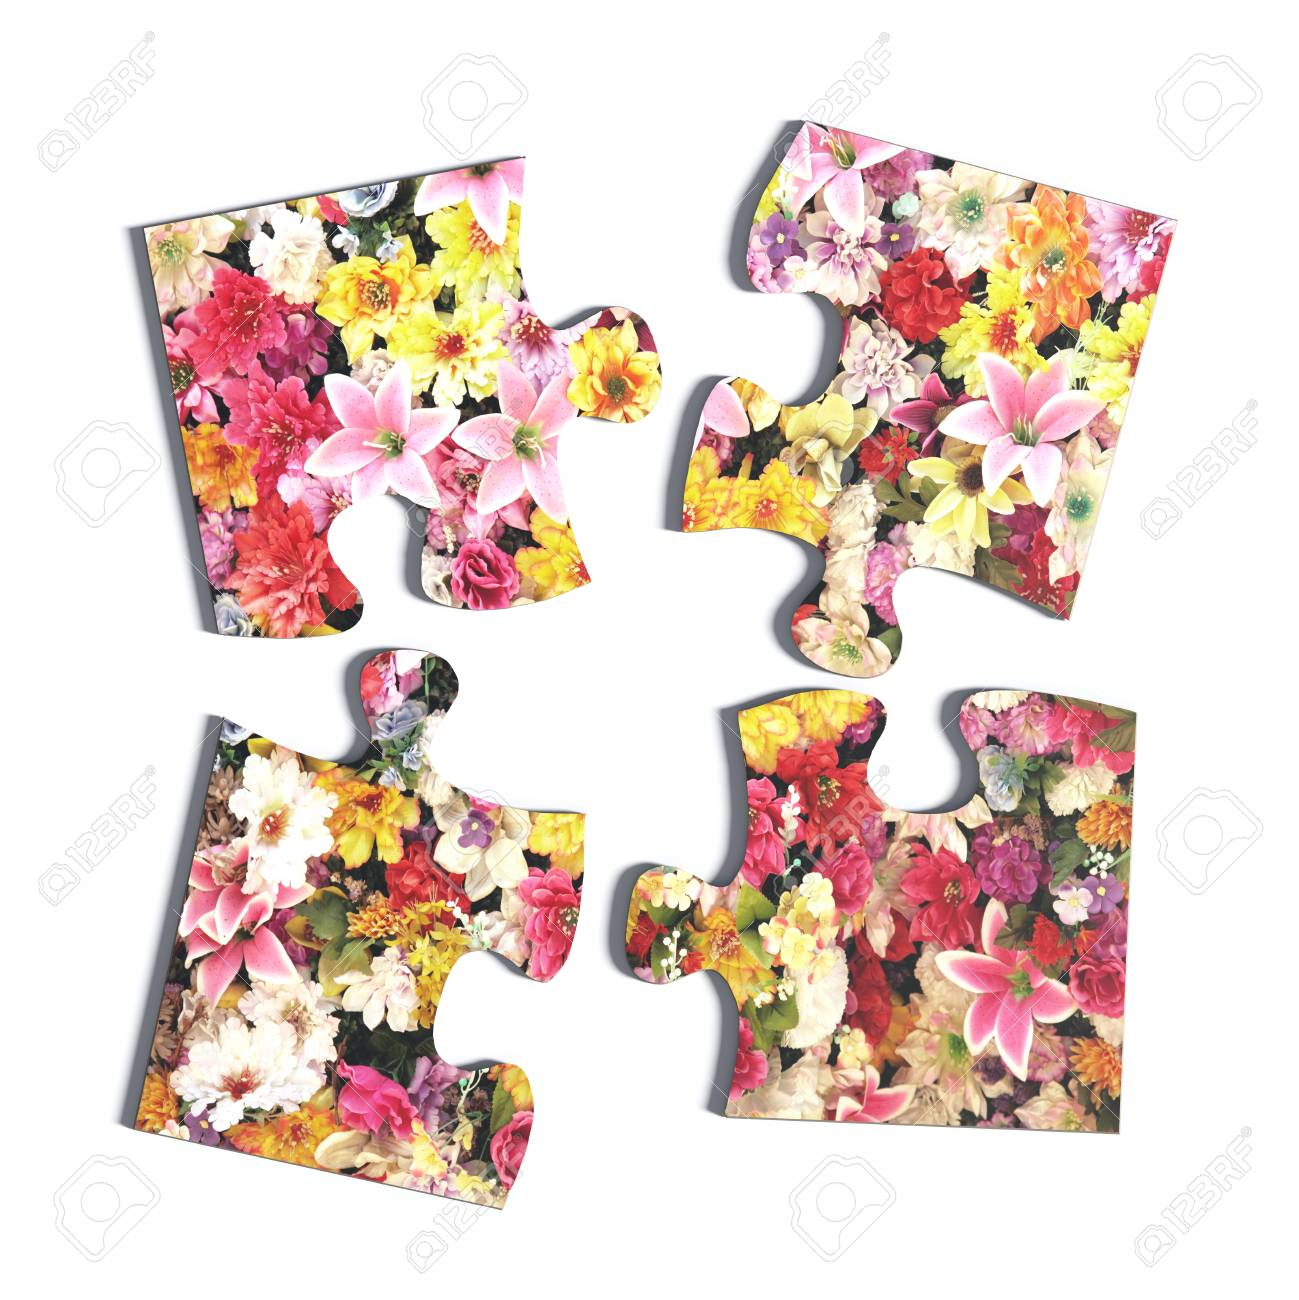 3D Rendering Of Four Puzzle Pieces With Flower Print On White - Print On Puzzle Pieces